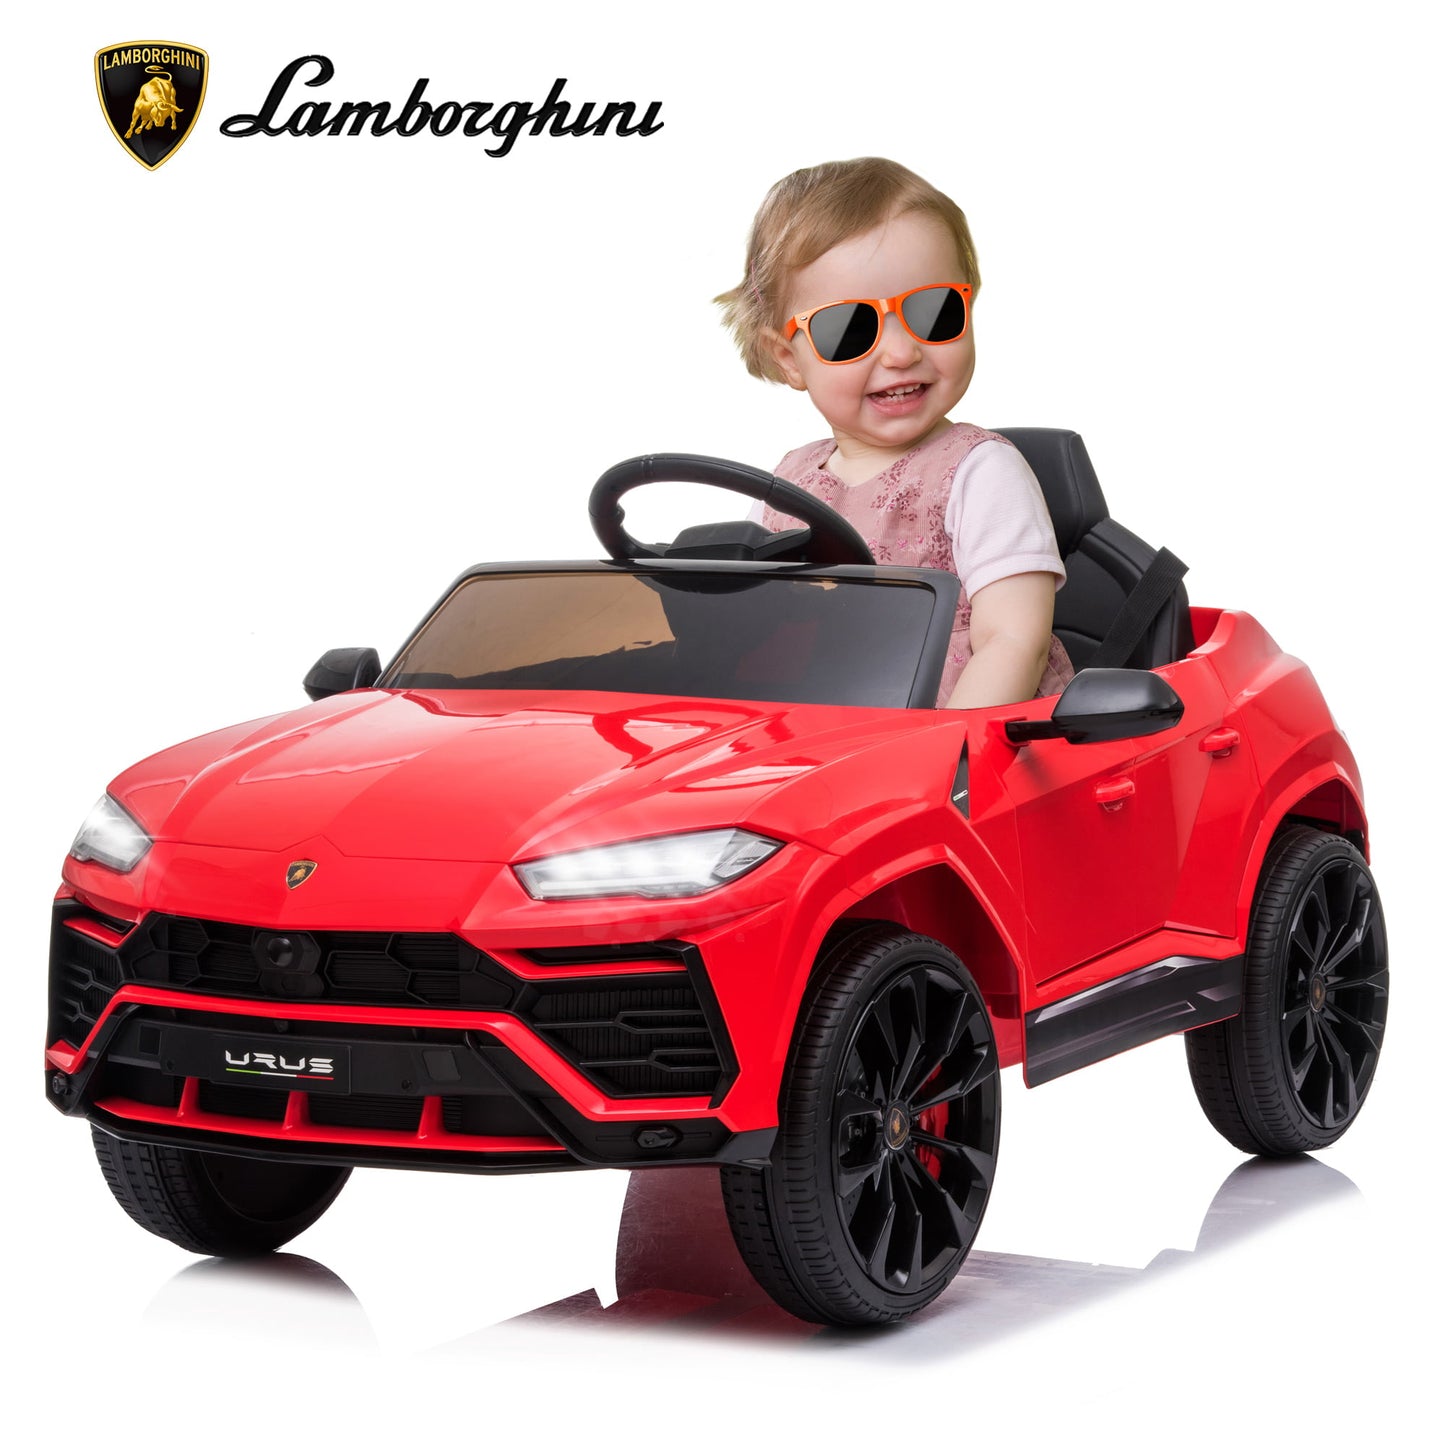 SYNGAR Battery Operated Car Toy for Kids, Licensed Lamborghini Ride on Cars with Remote Control, 3 Speeds, LED Lights, Player, Horn, Electric Vehicle Kids Party Gift, Red